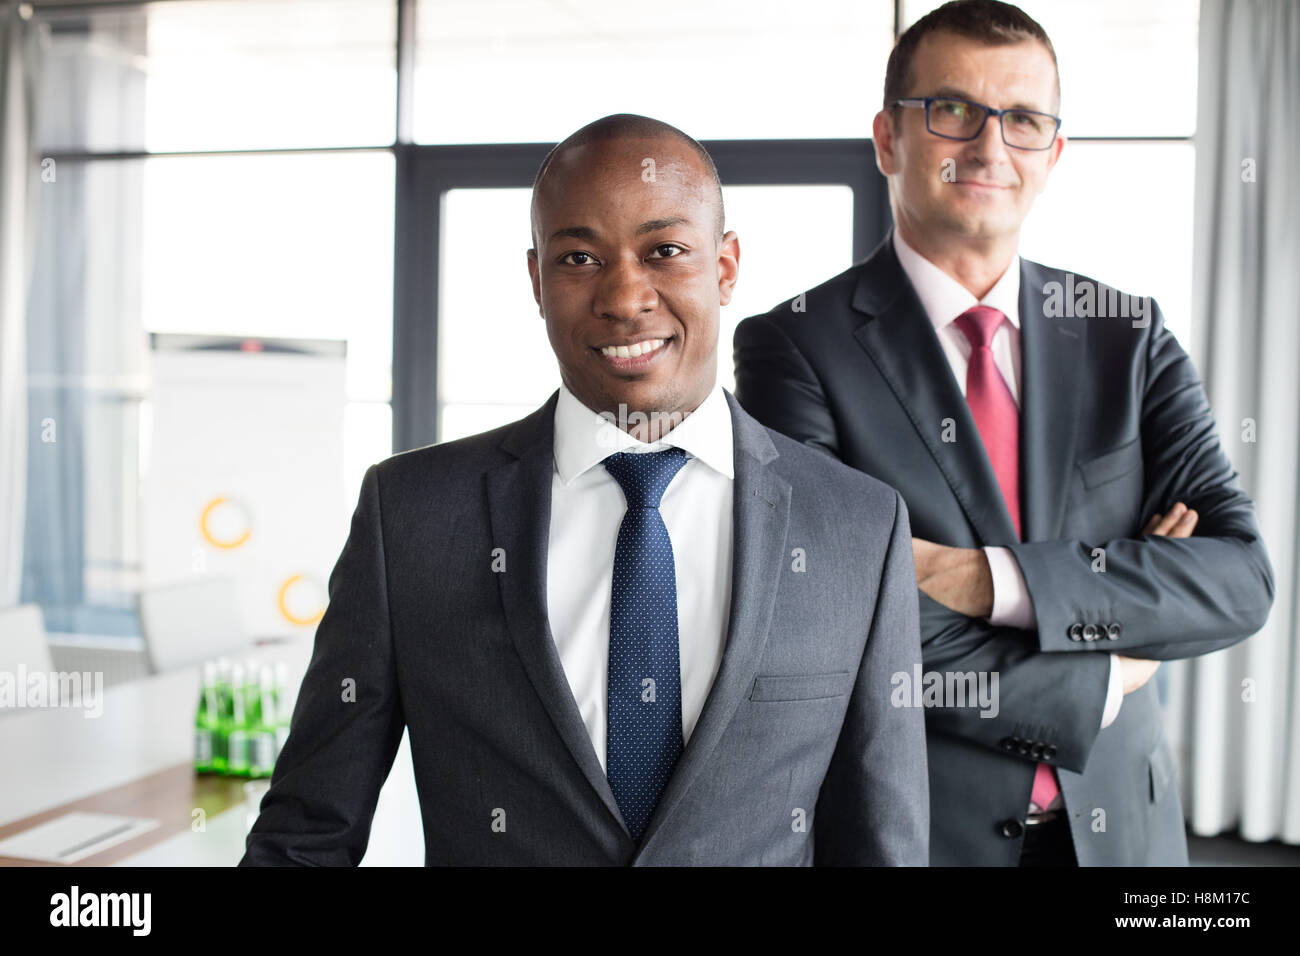 Portrait of smiling businessman with male colleague in office Banque D'Images